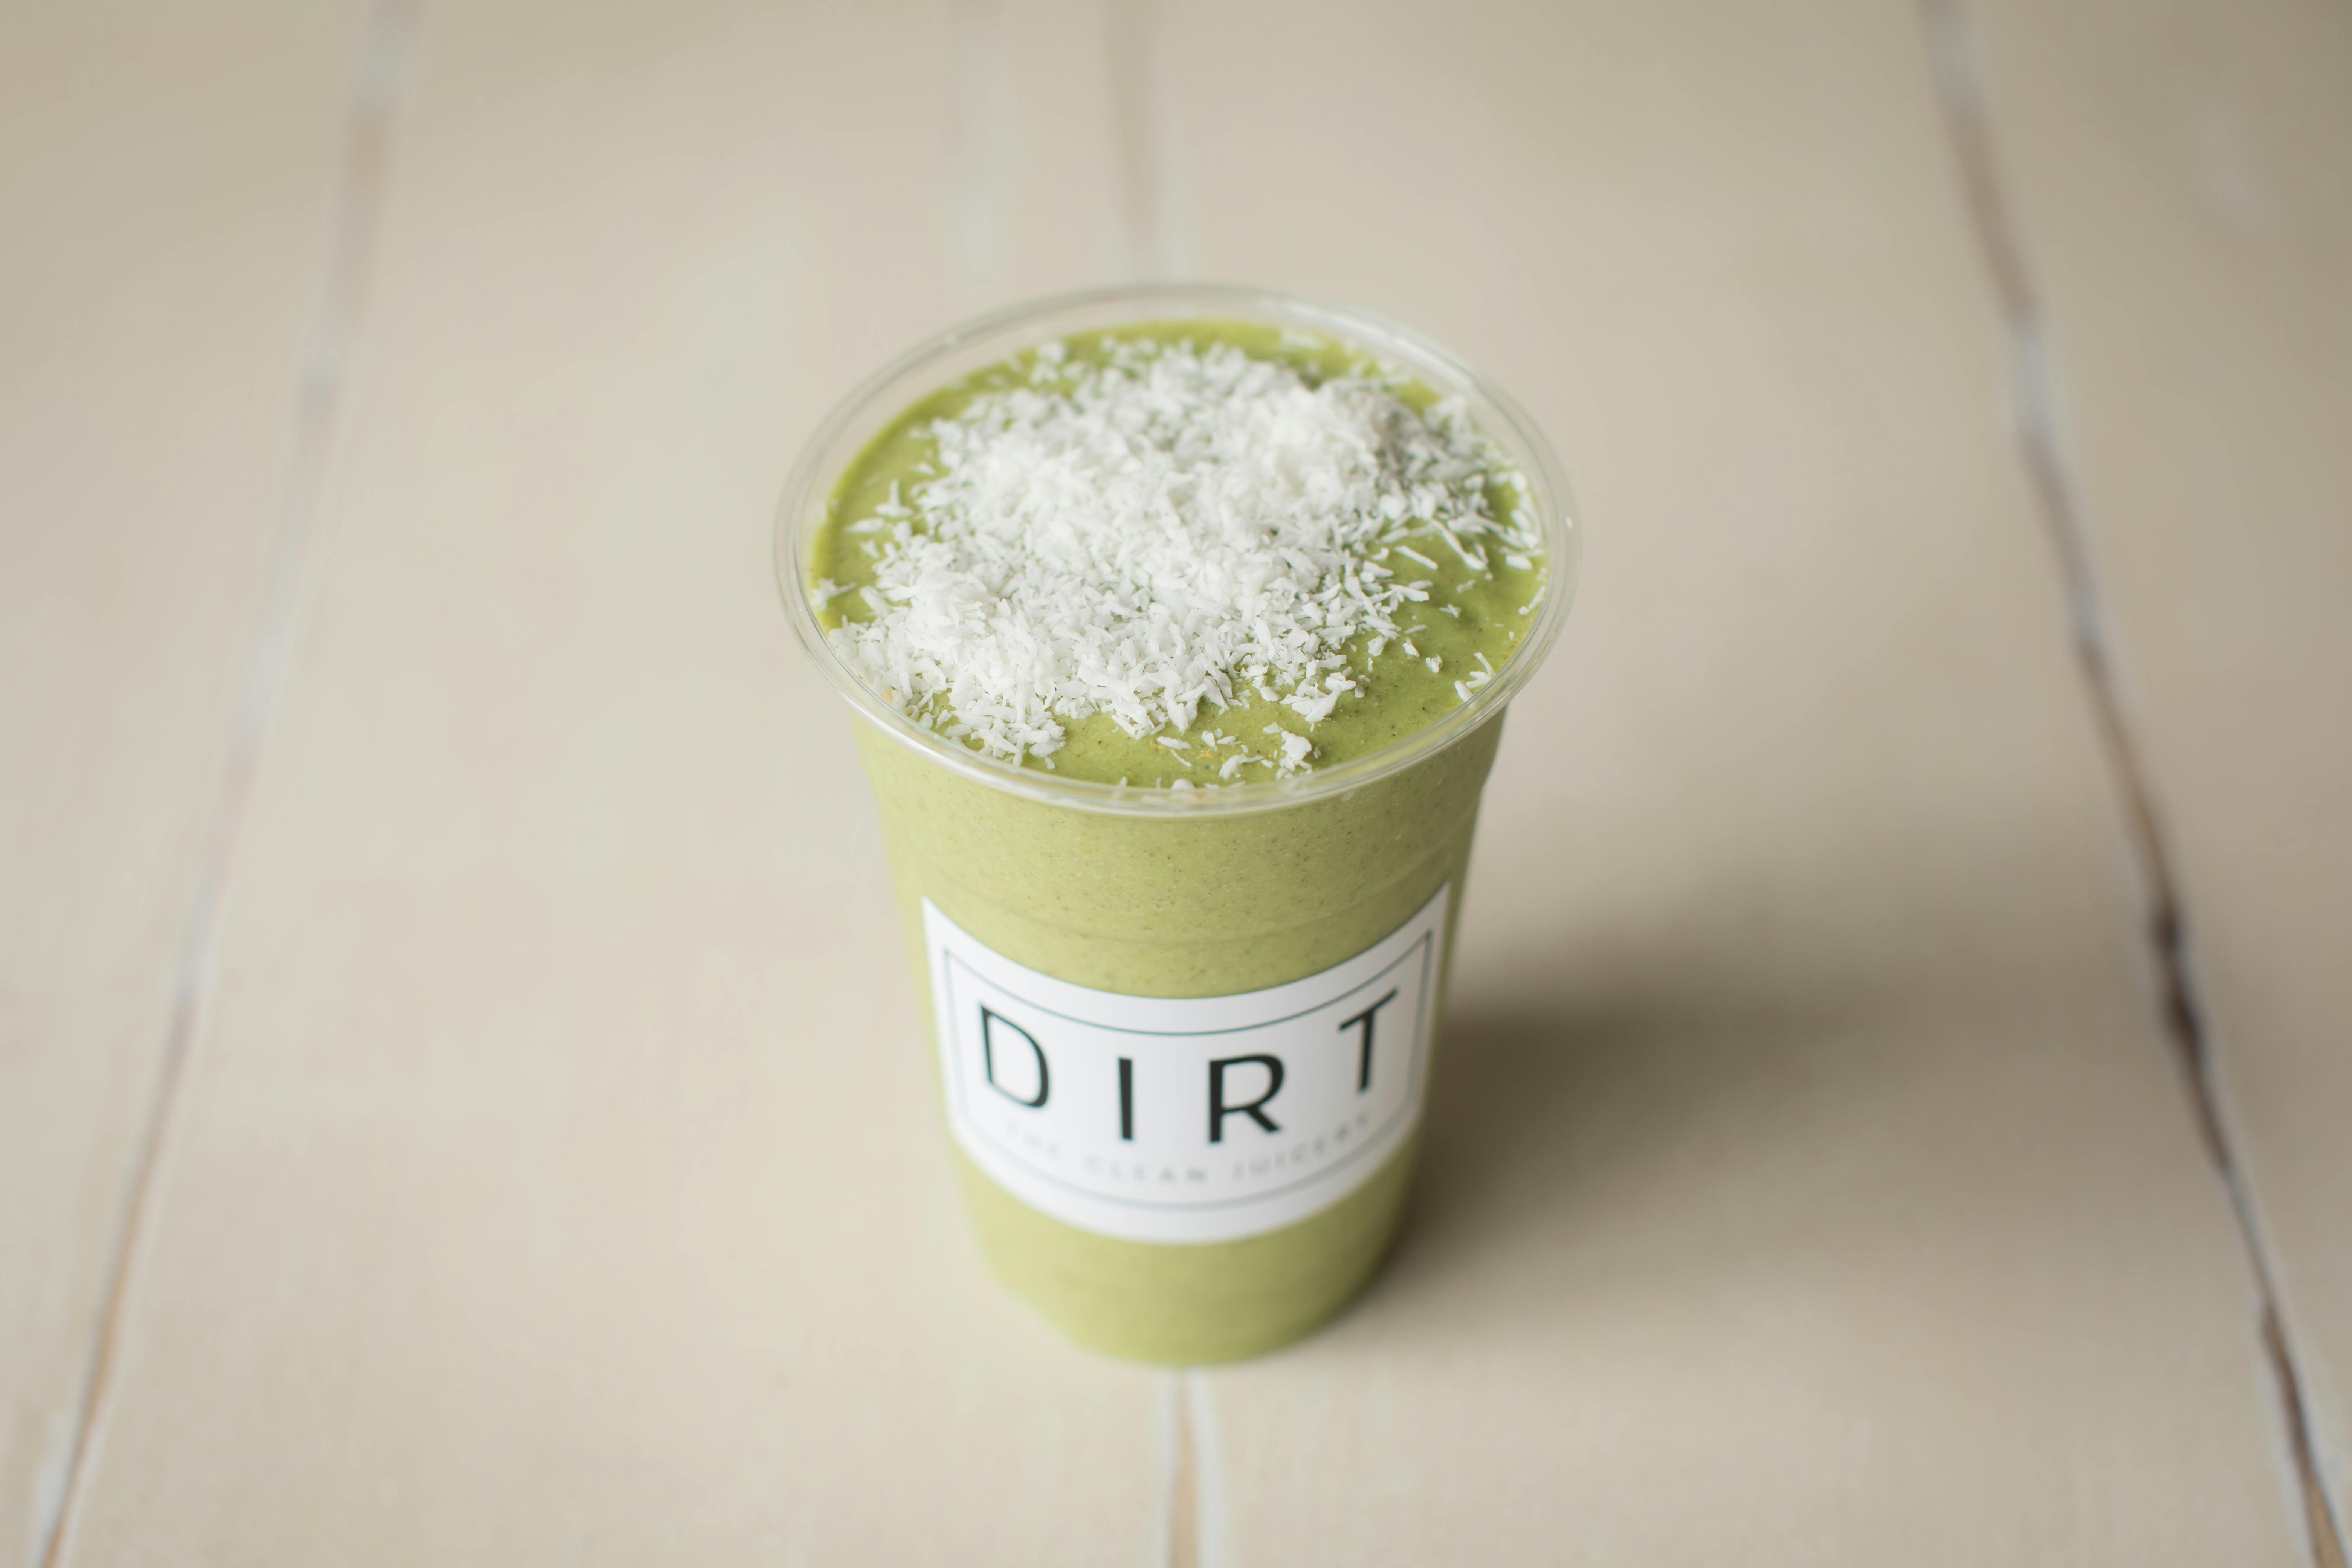 Pina "Kale" Ada from Dirt Juicery - Lineville Rd in Green Bay, WI